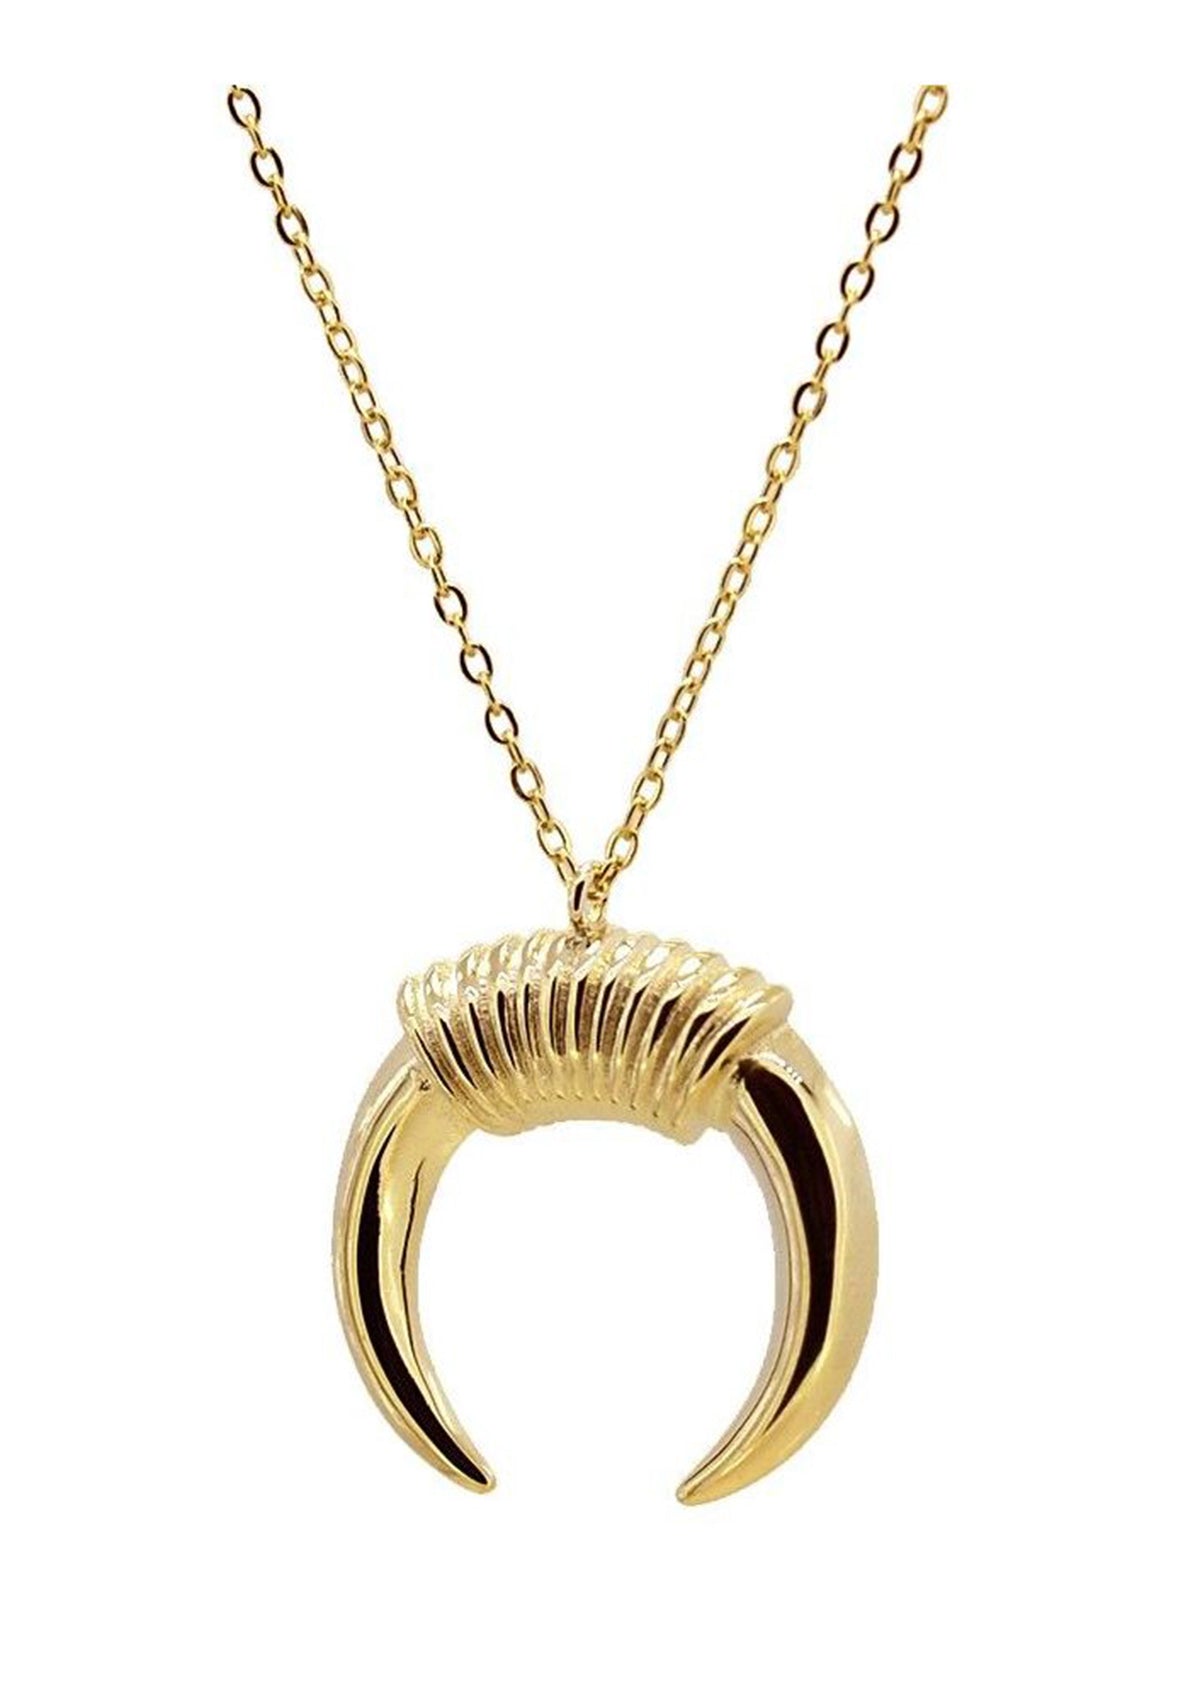 Horn Necklace | Black Book Fashion